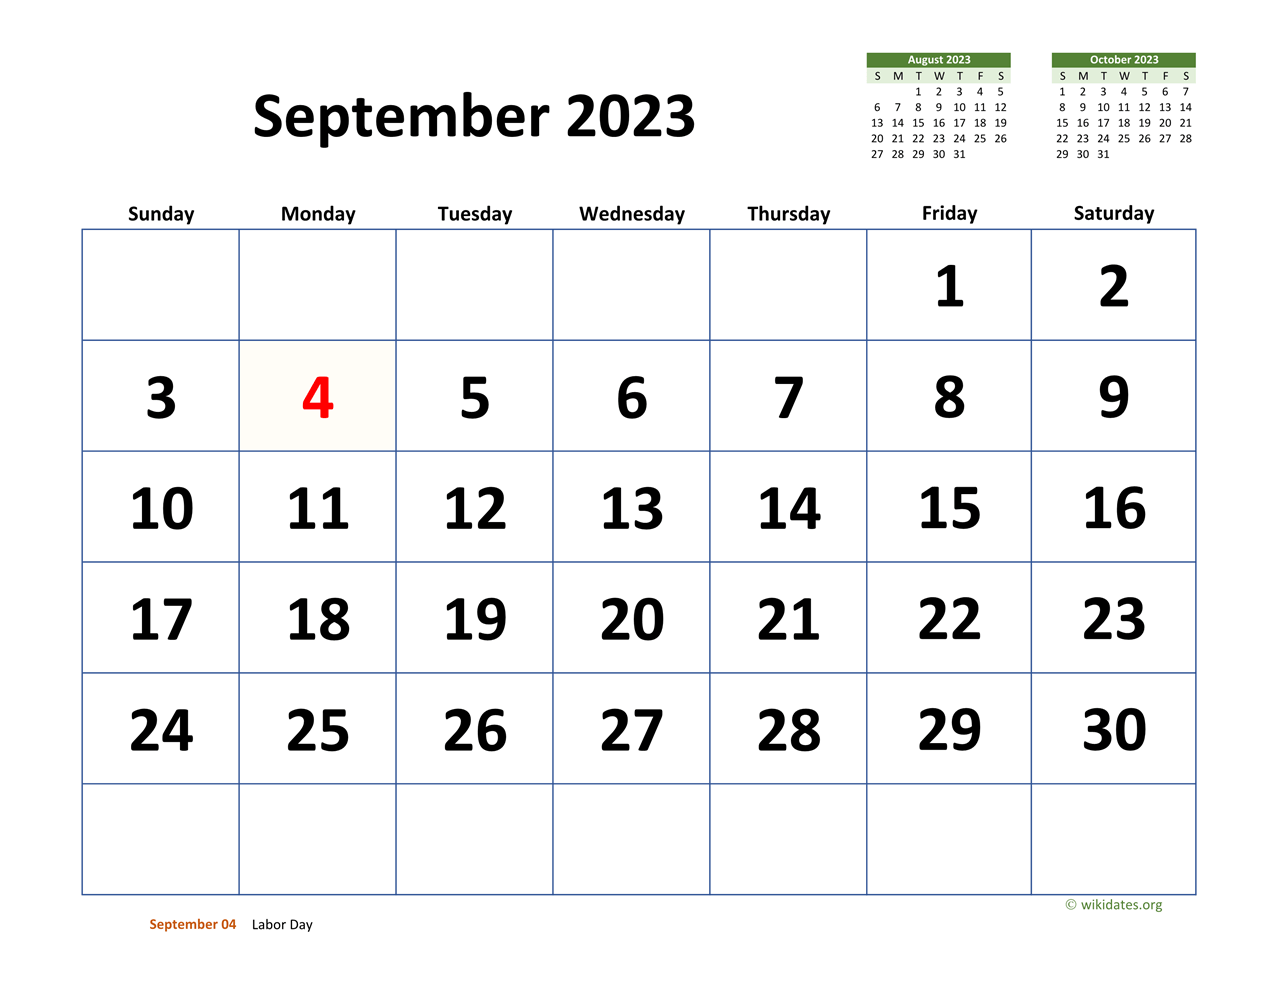 September 2023 Calendar with Extralarge Dates